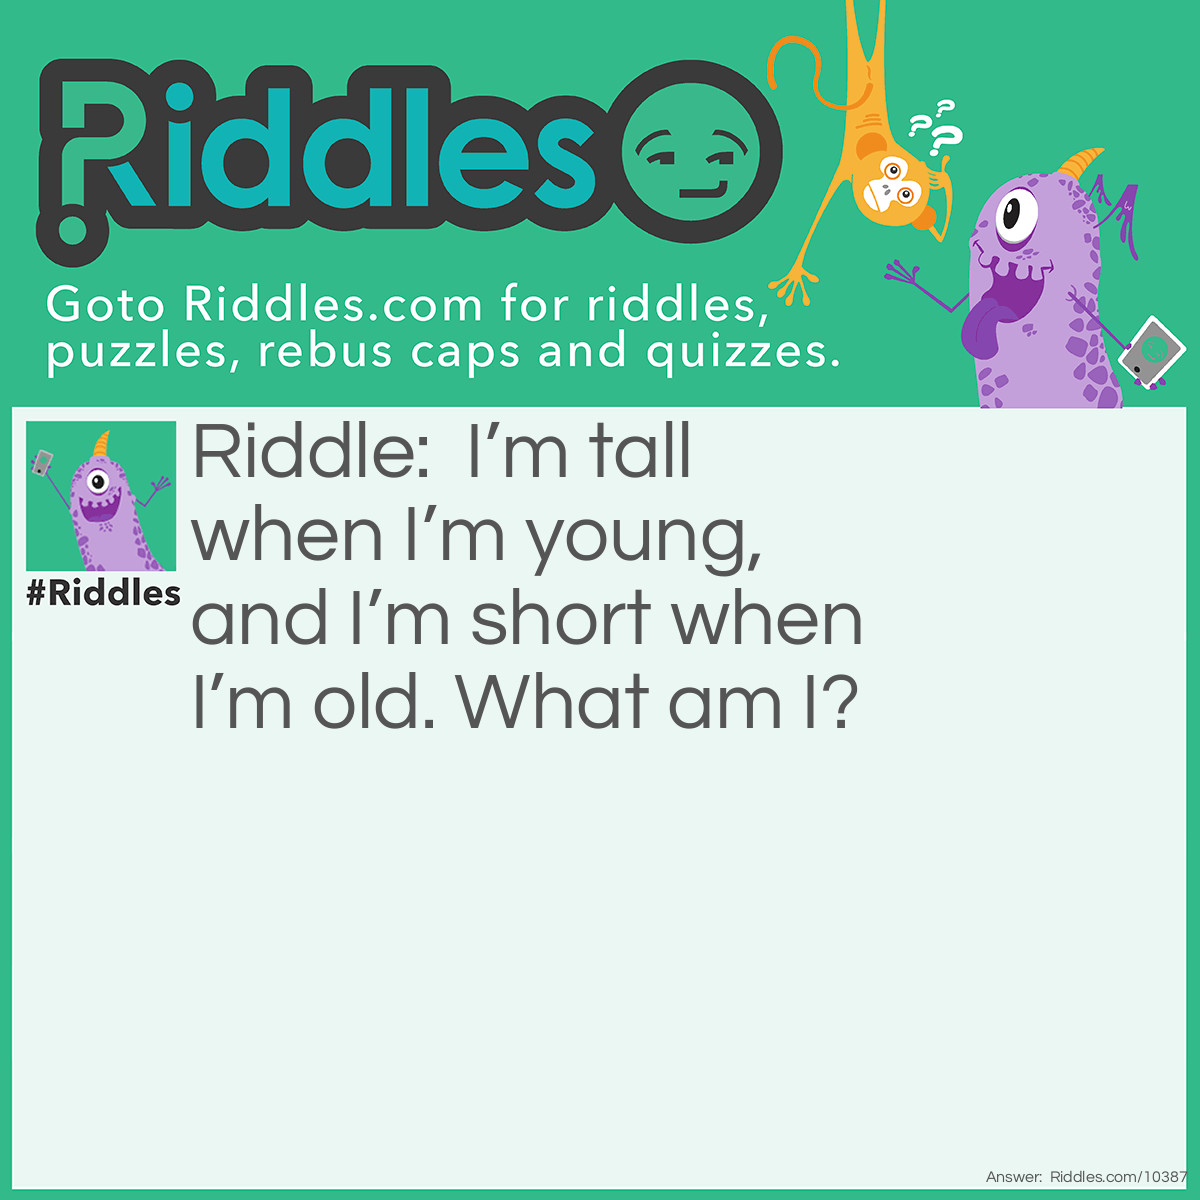 Riddle: I’m tall when I’m young, and I’m short when I’m old. What am I? Answer: A candle.